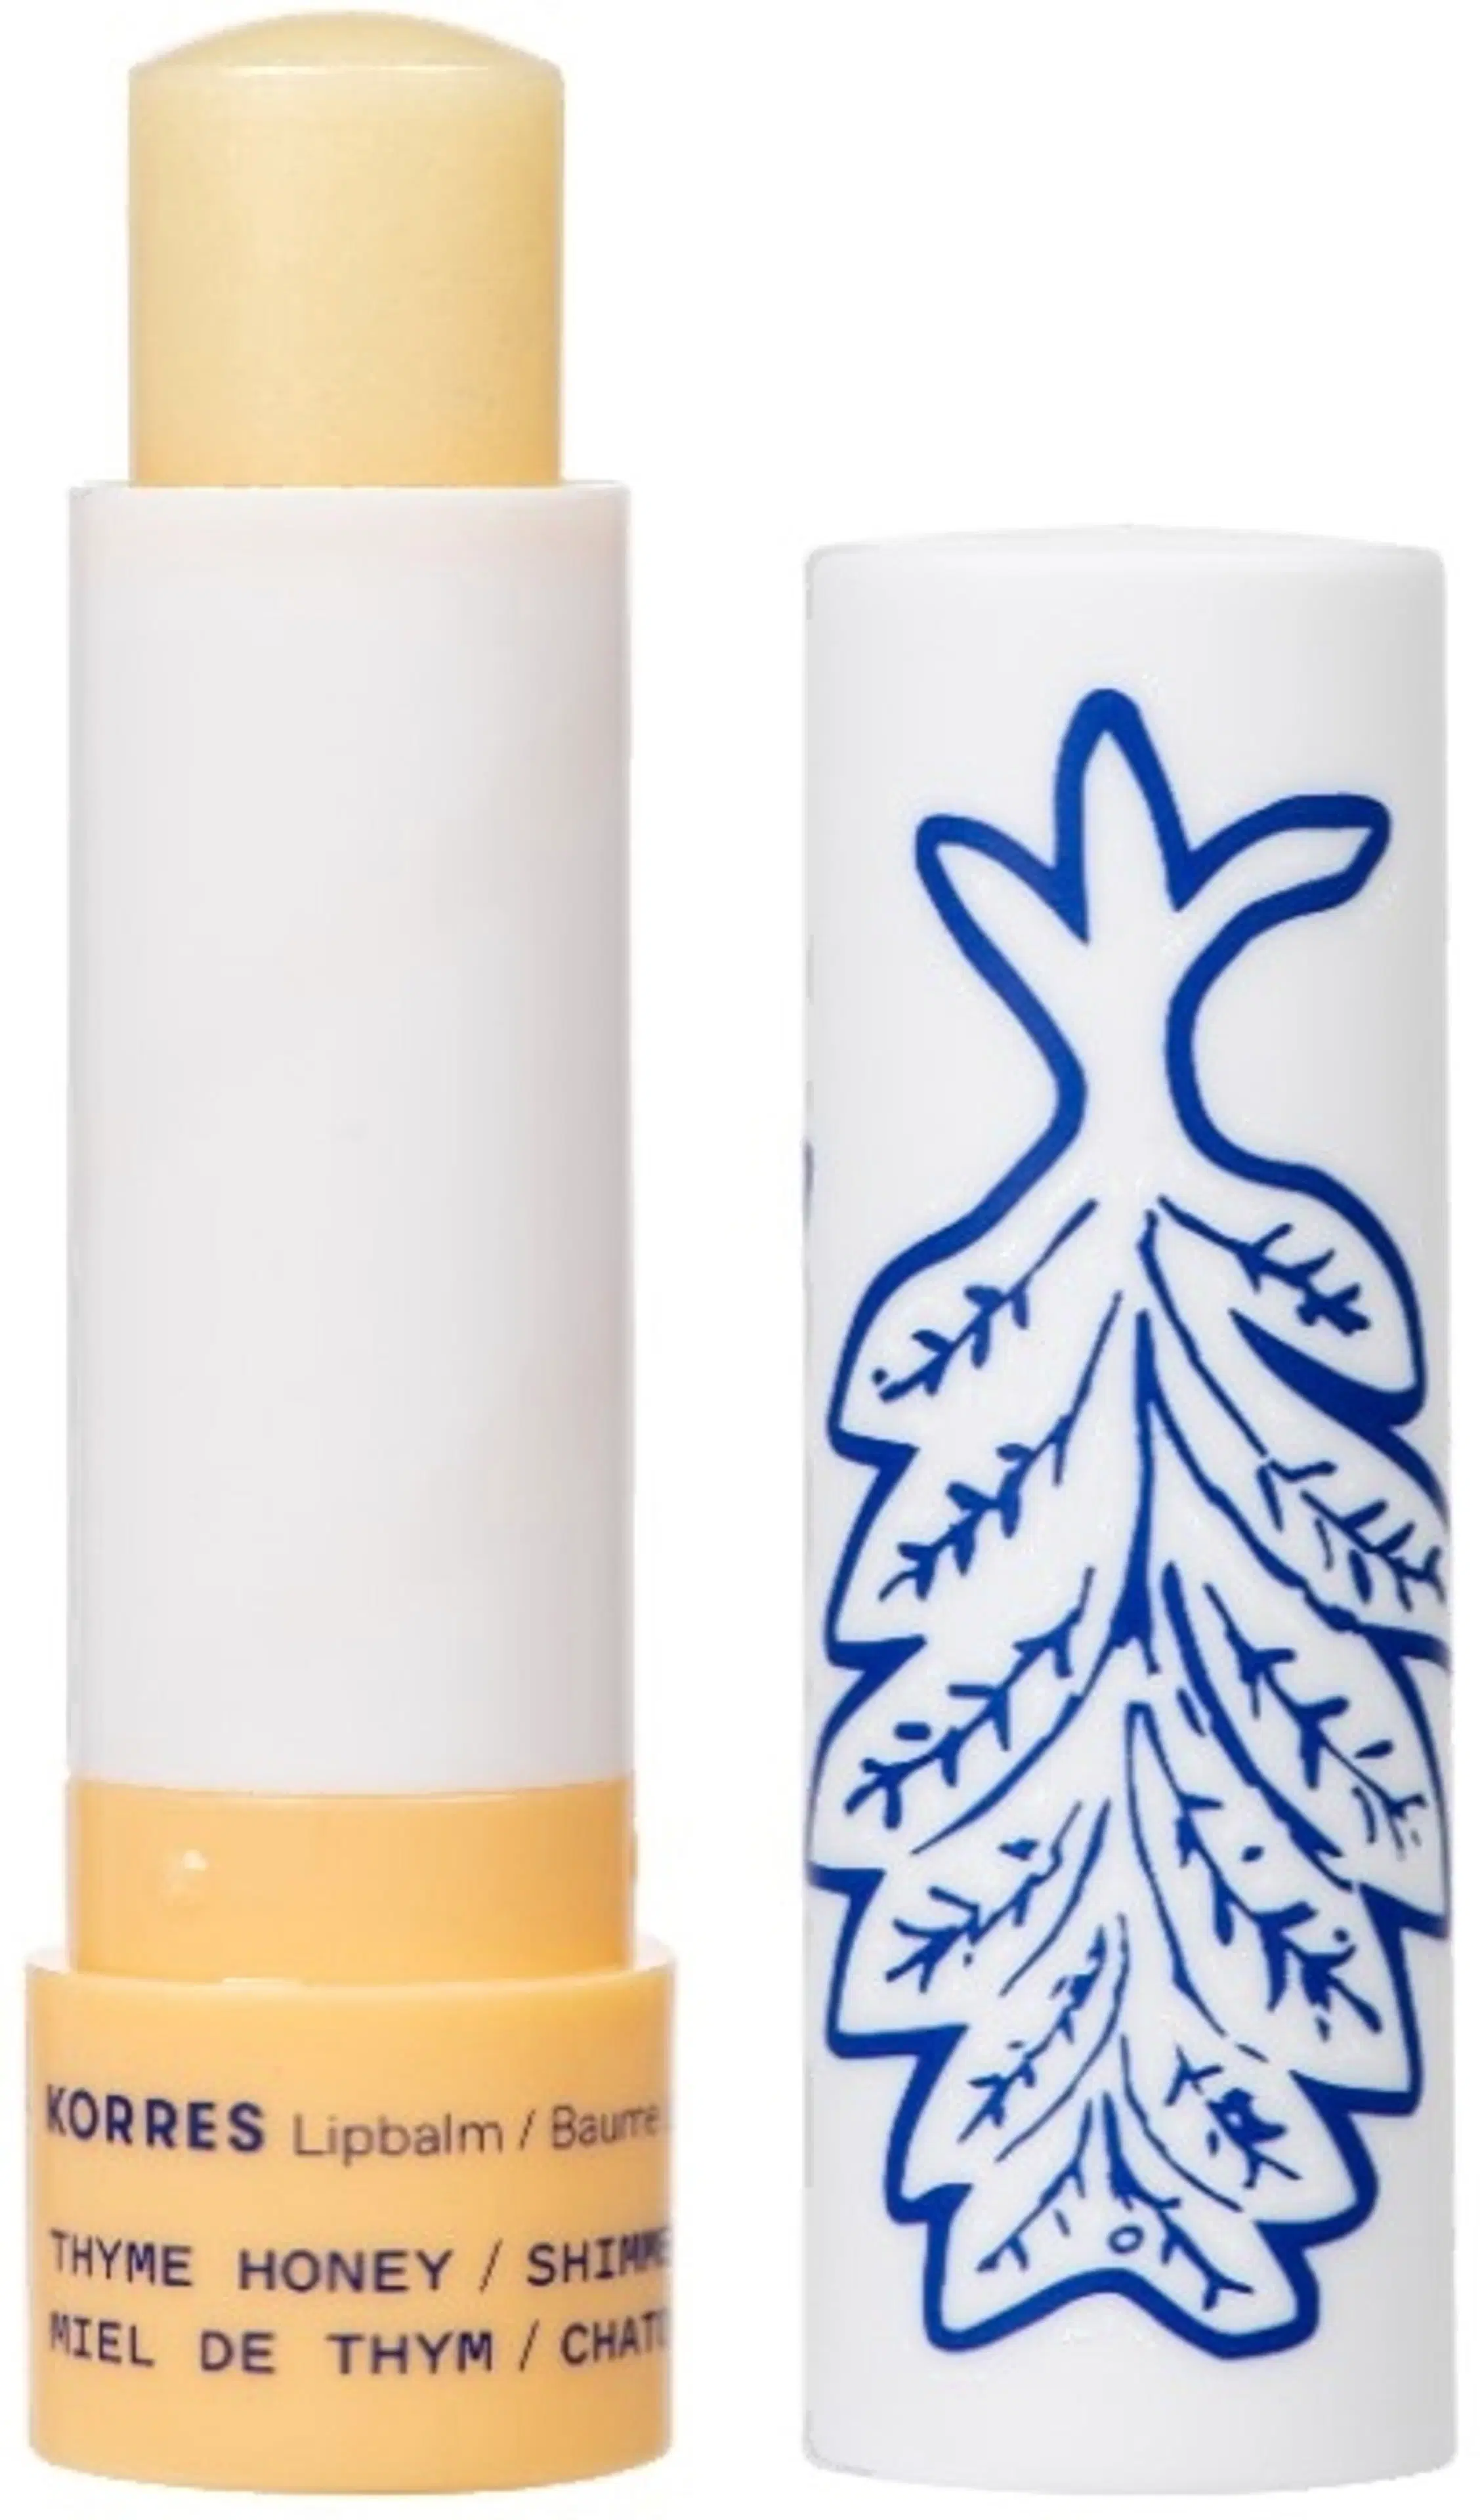 KORRES Thyme Honey Shimmery Lipbalm huulivoide 4,5 g